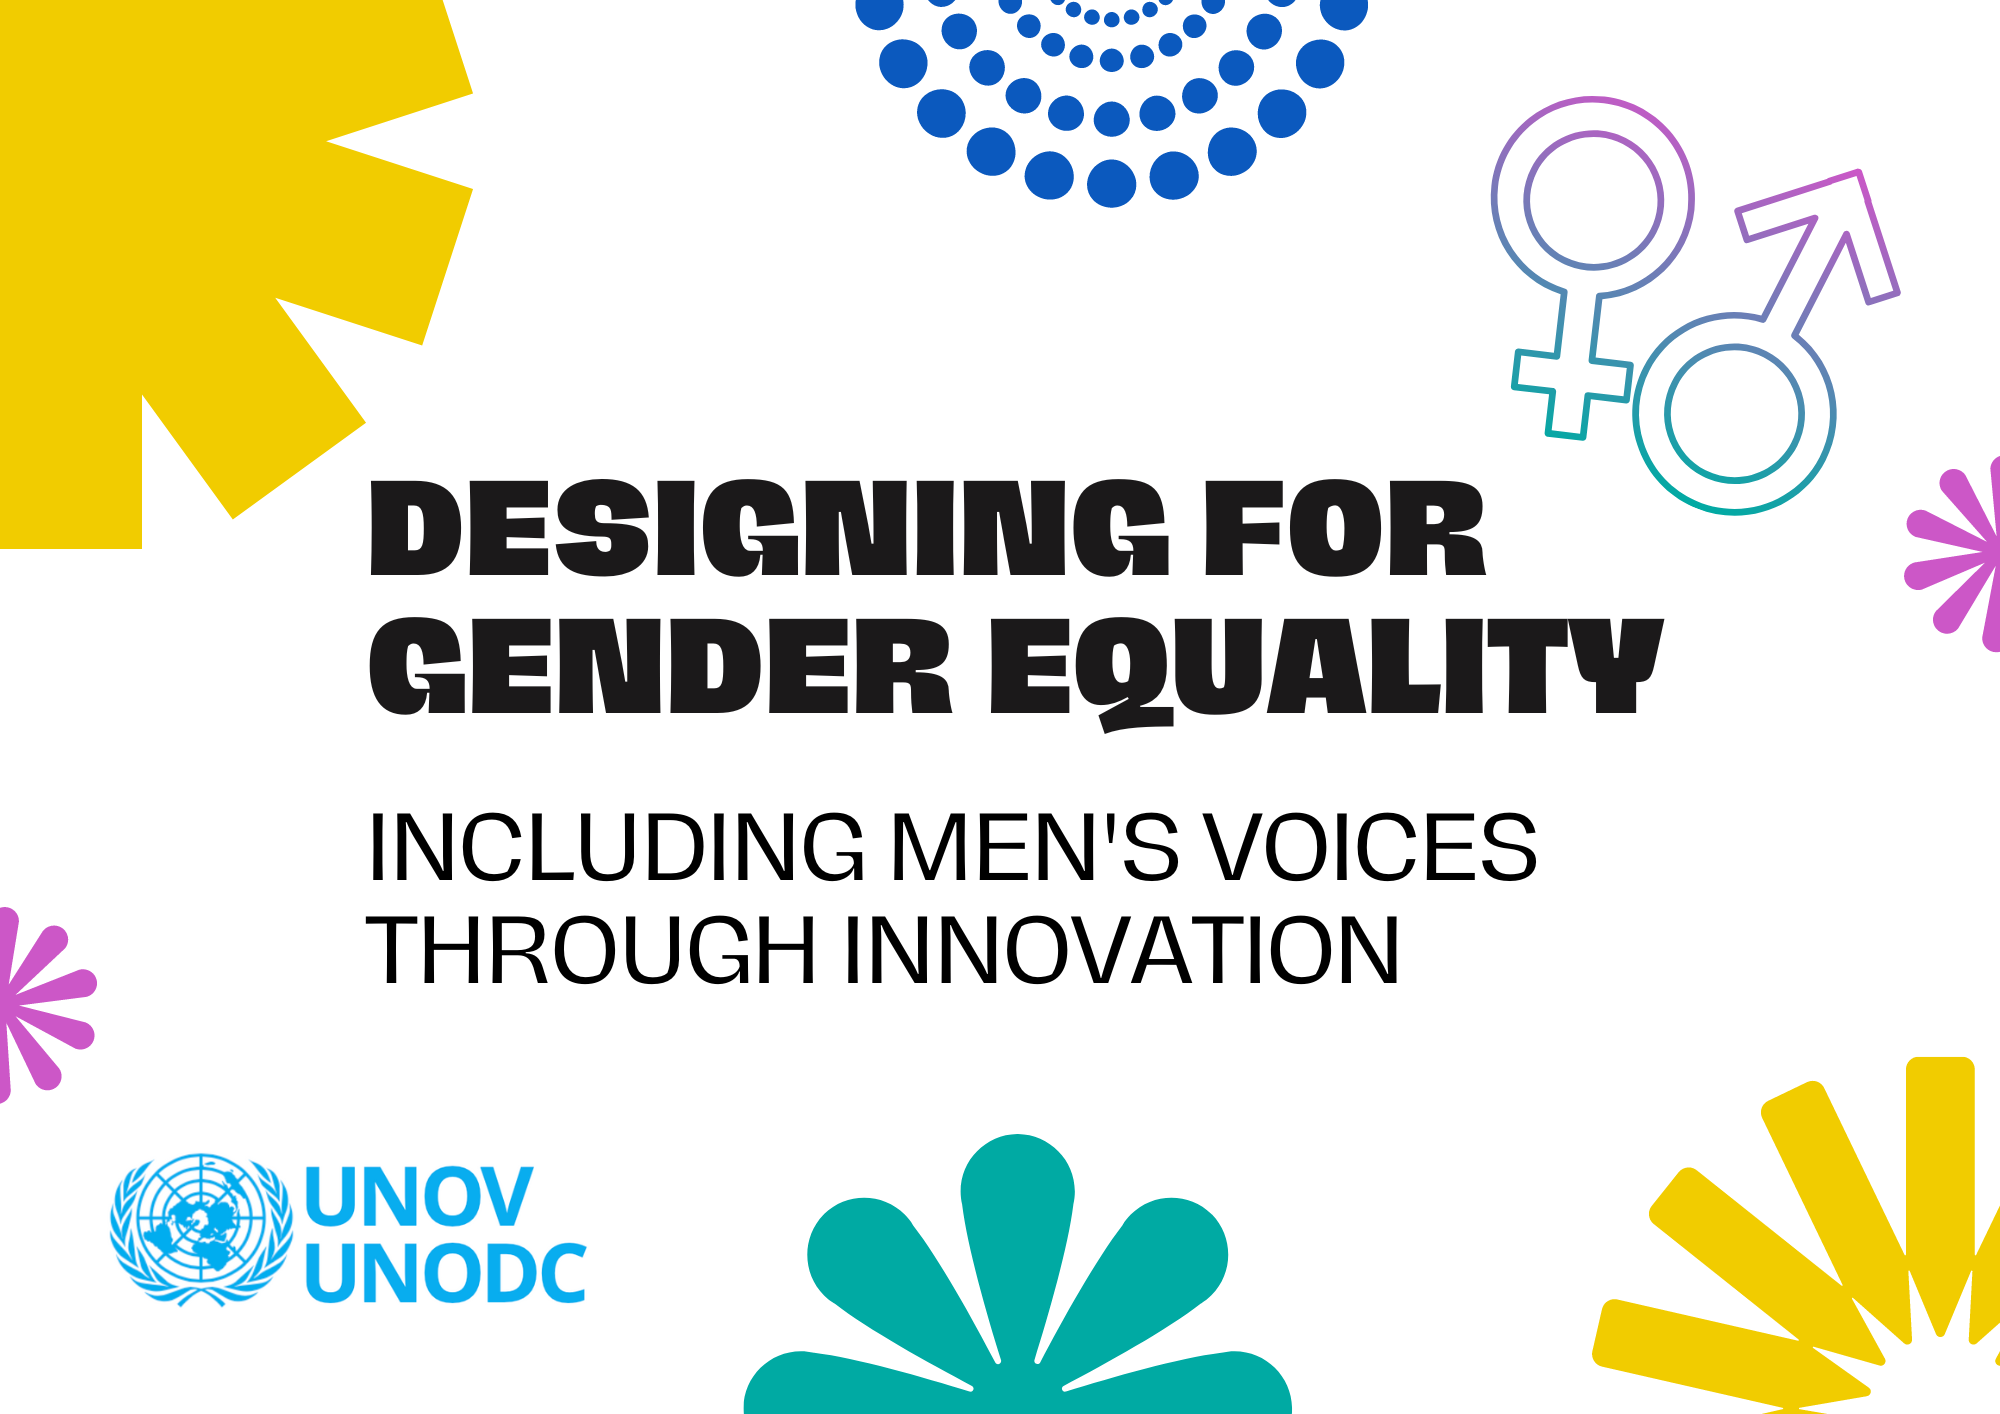 <div style="text-align:justify"><em>Vienna, May 2023</em> - In order to better understand how to enable men to act as agents of change in the advancement of gender equality and women and girls’ empowerment, HRMS and the Gender Team at UNOV/UNODC launched an initiative to listen to men&#39;s perspectives on gender equality and develop ideas to increase men&#39;s involvement. (<a href="https://www.unodc.org/unodc/en/gender/news/engaging-men-for-gender-equality-at-unov-unodc.html">Read more</a>)</div>